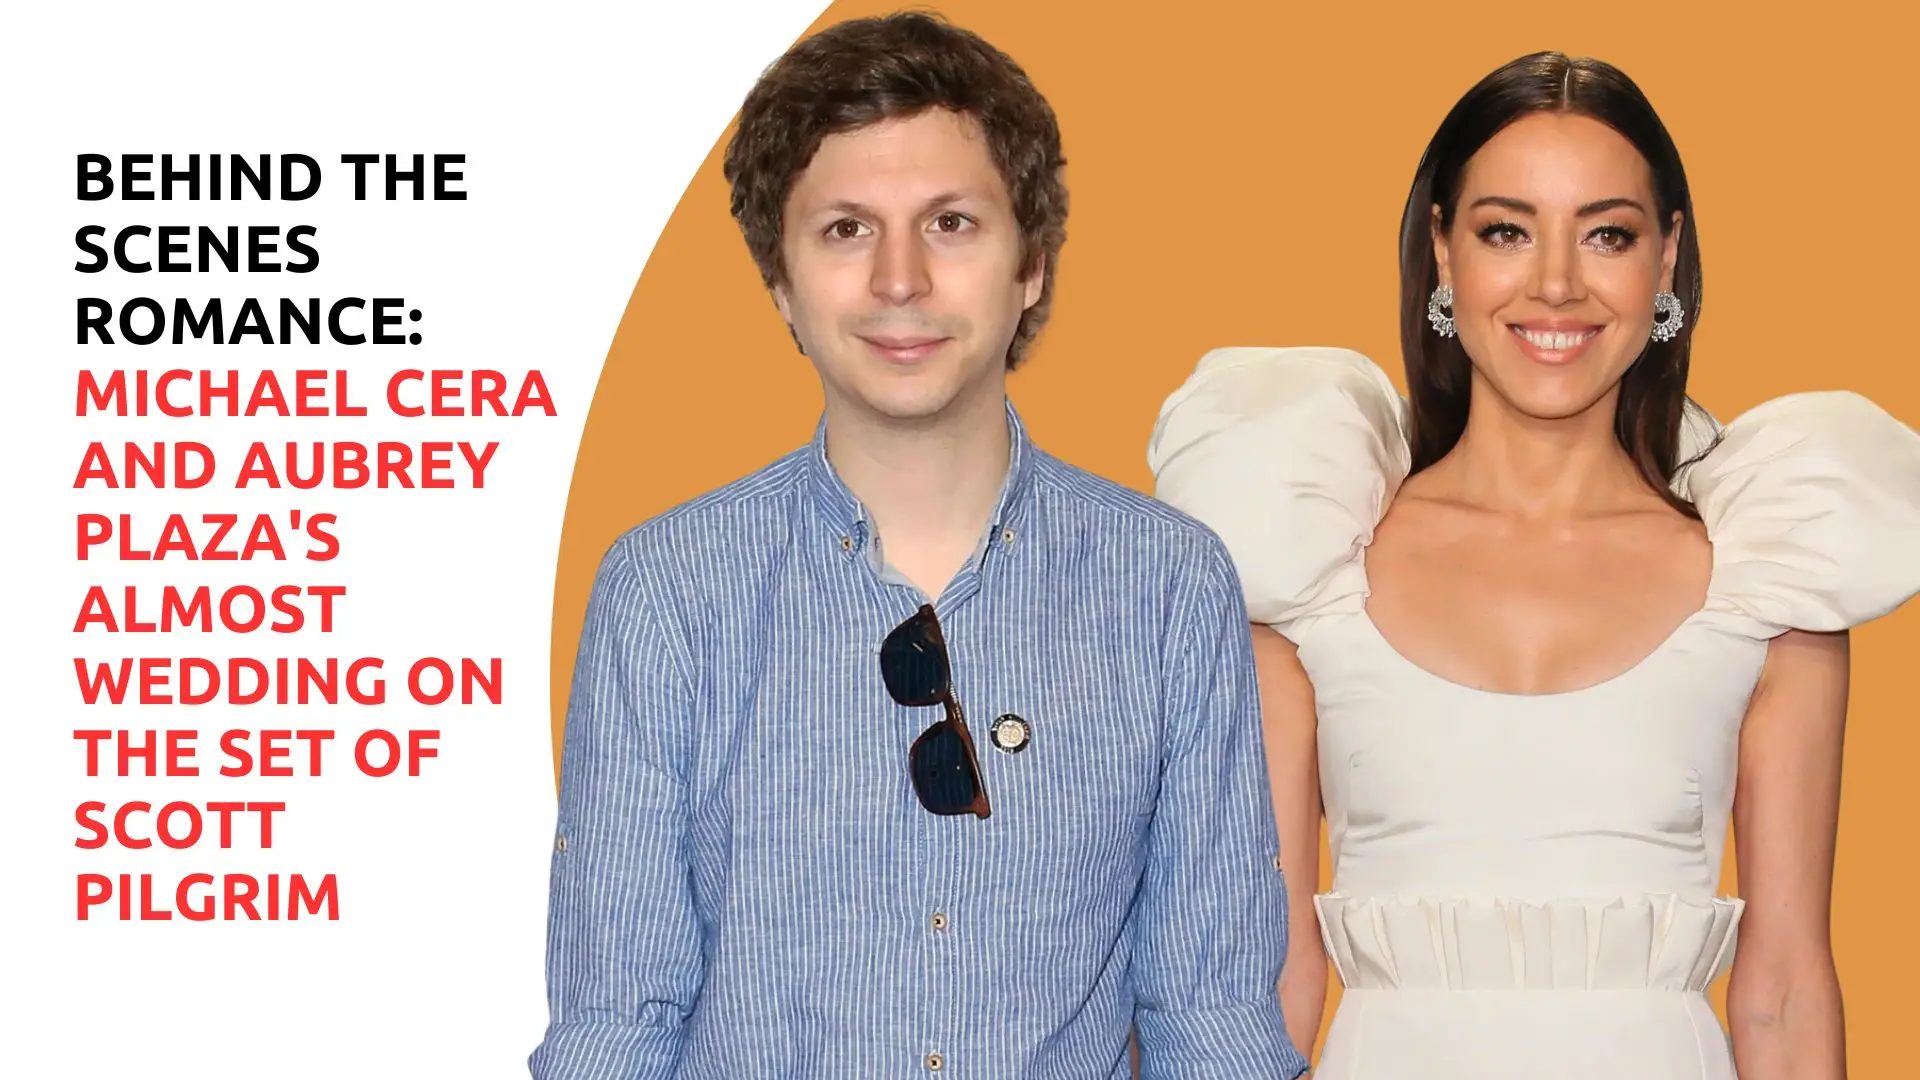 Michael Cera and Aubrey Plaza Almost Got Married While Filming Scott Pilgrim